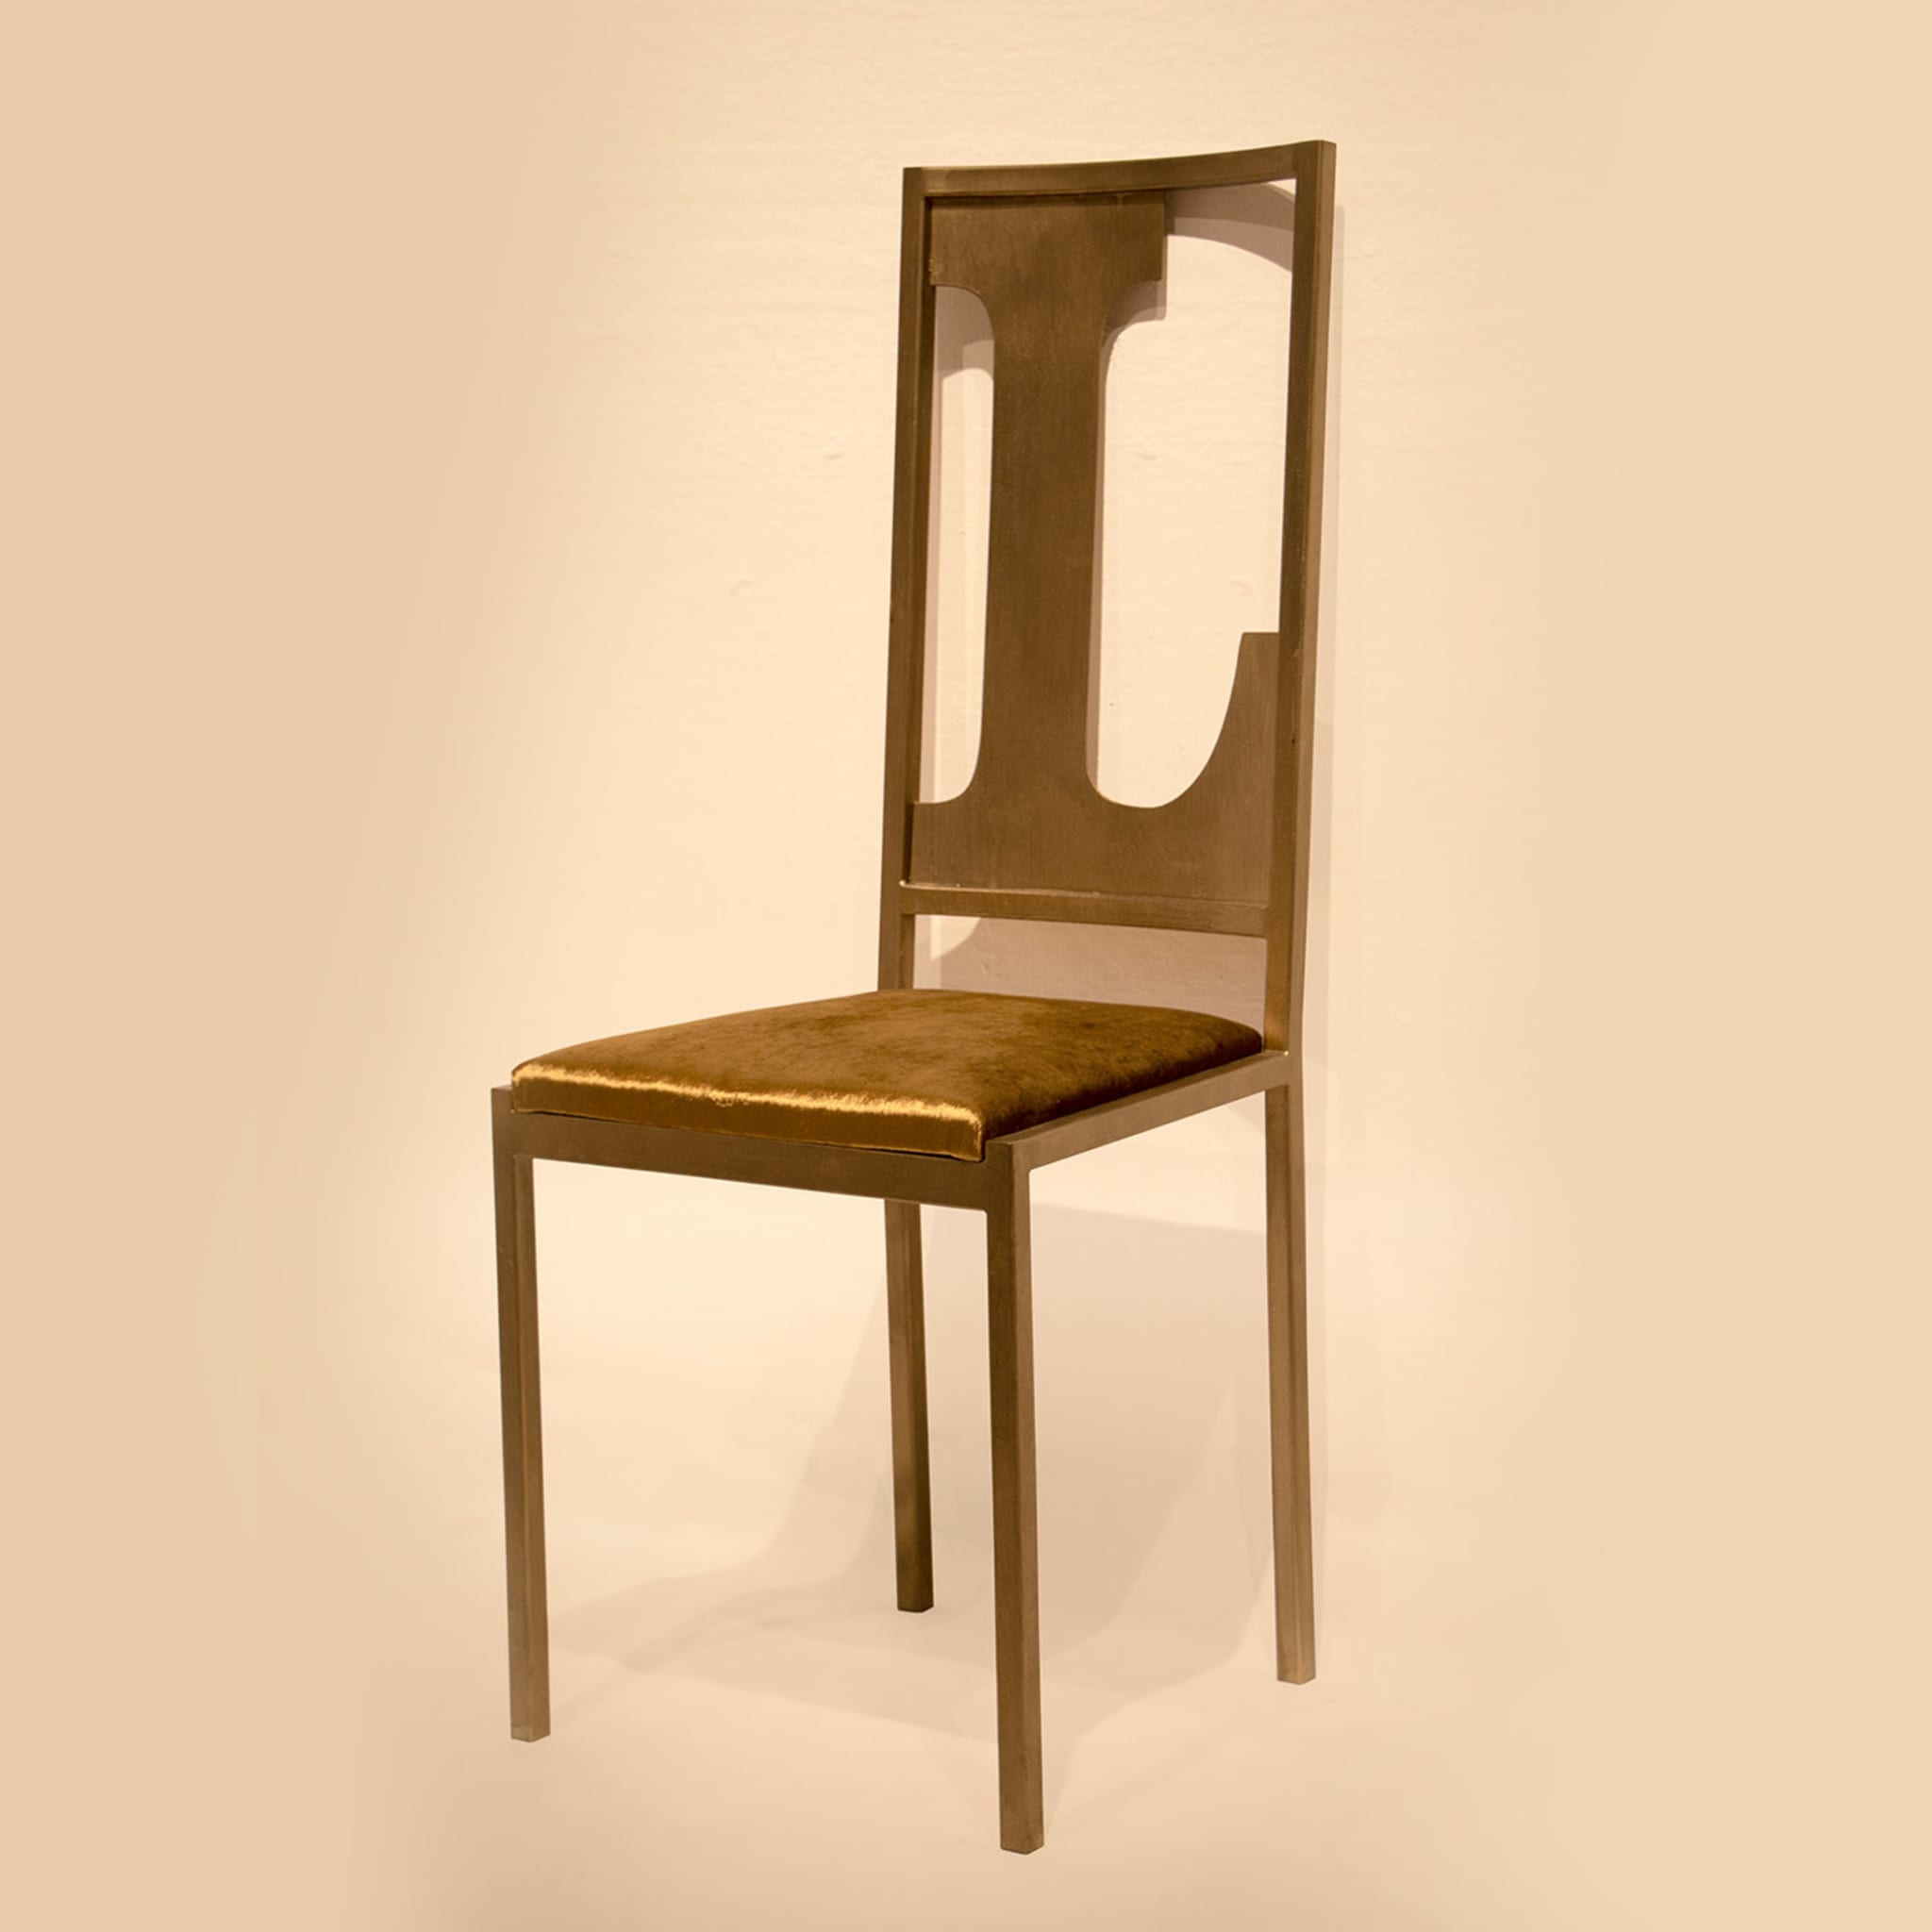 Gold Letter L Chair - Alternative view 1